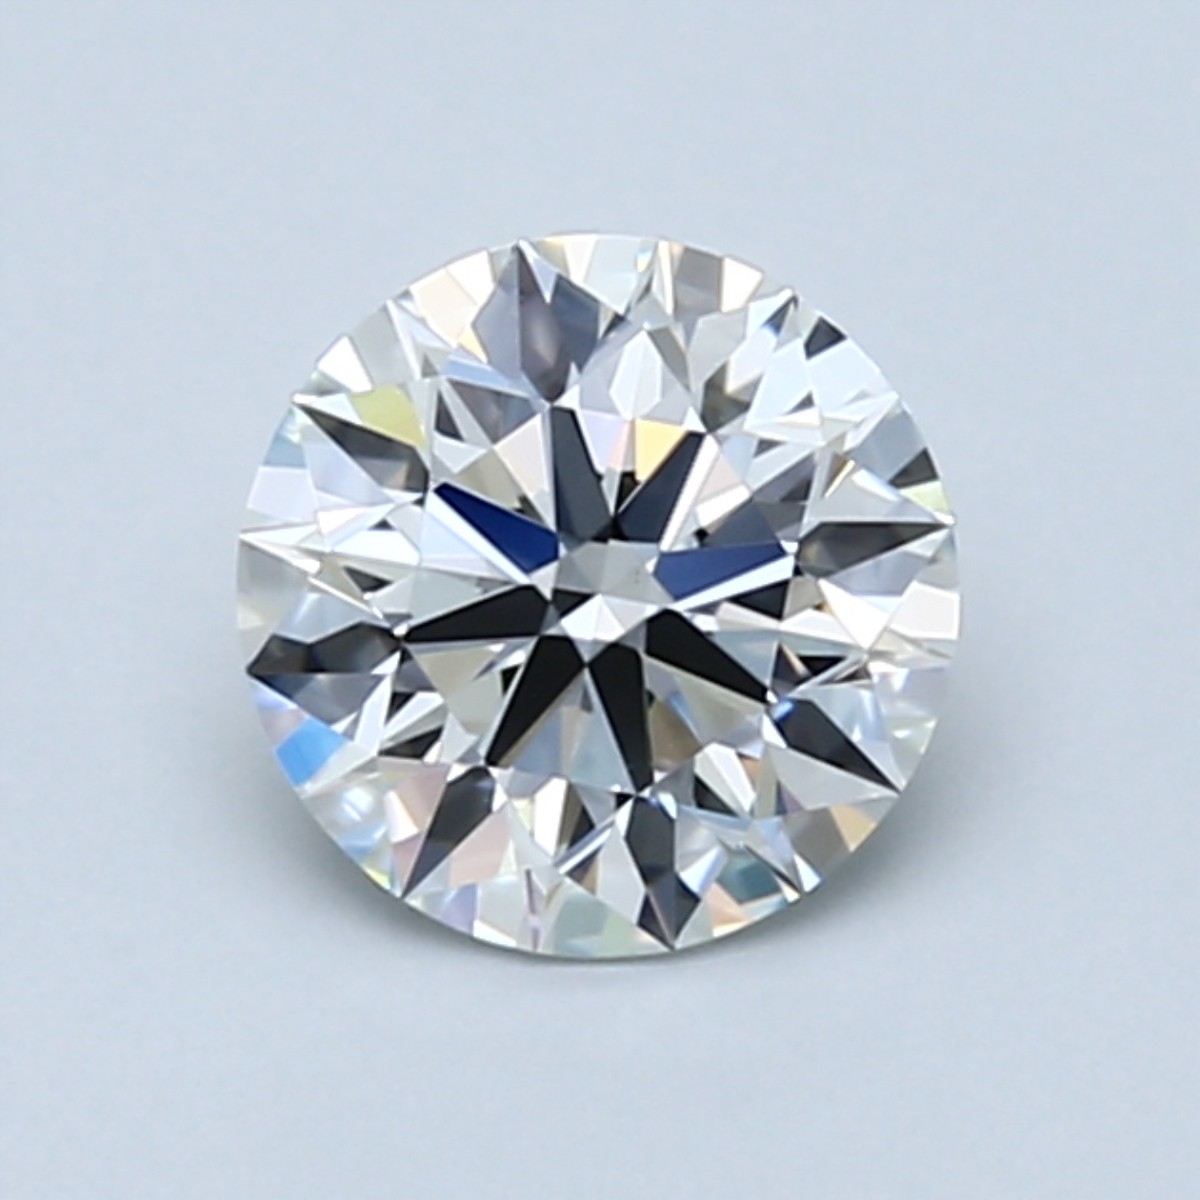 G Color Diamonds: Are They White Enough?